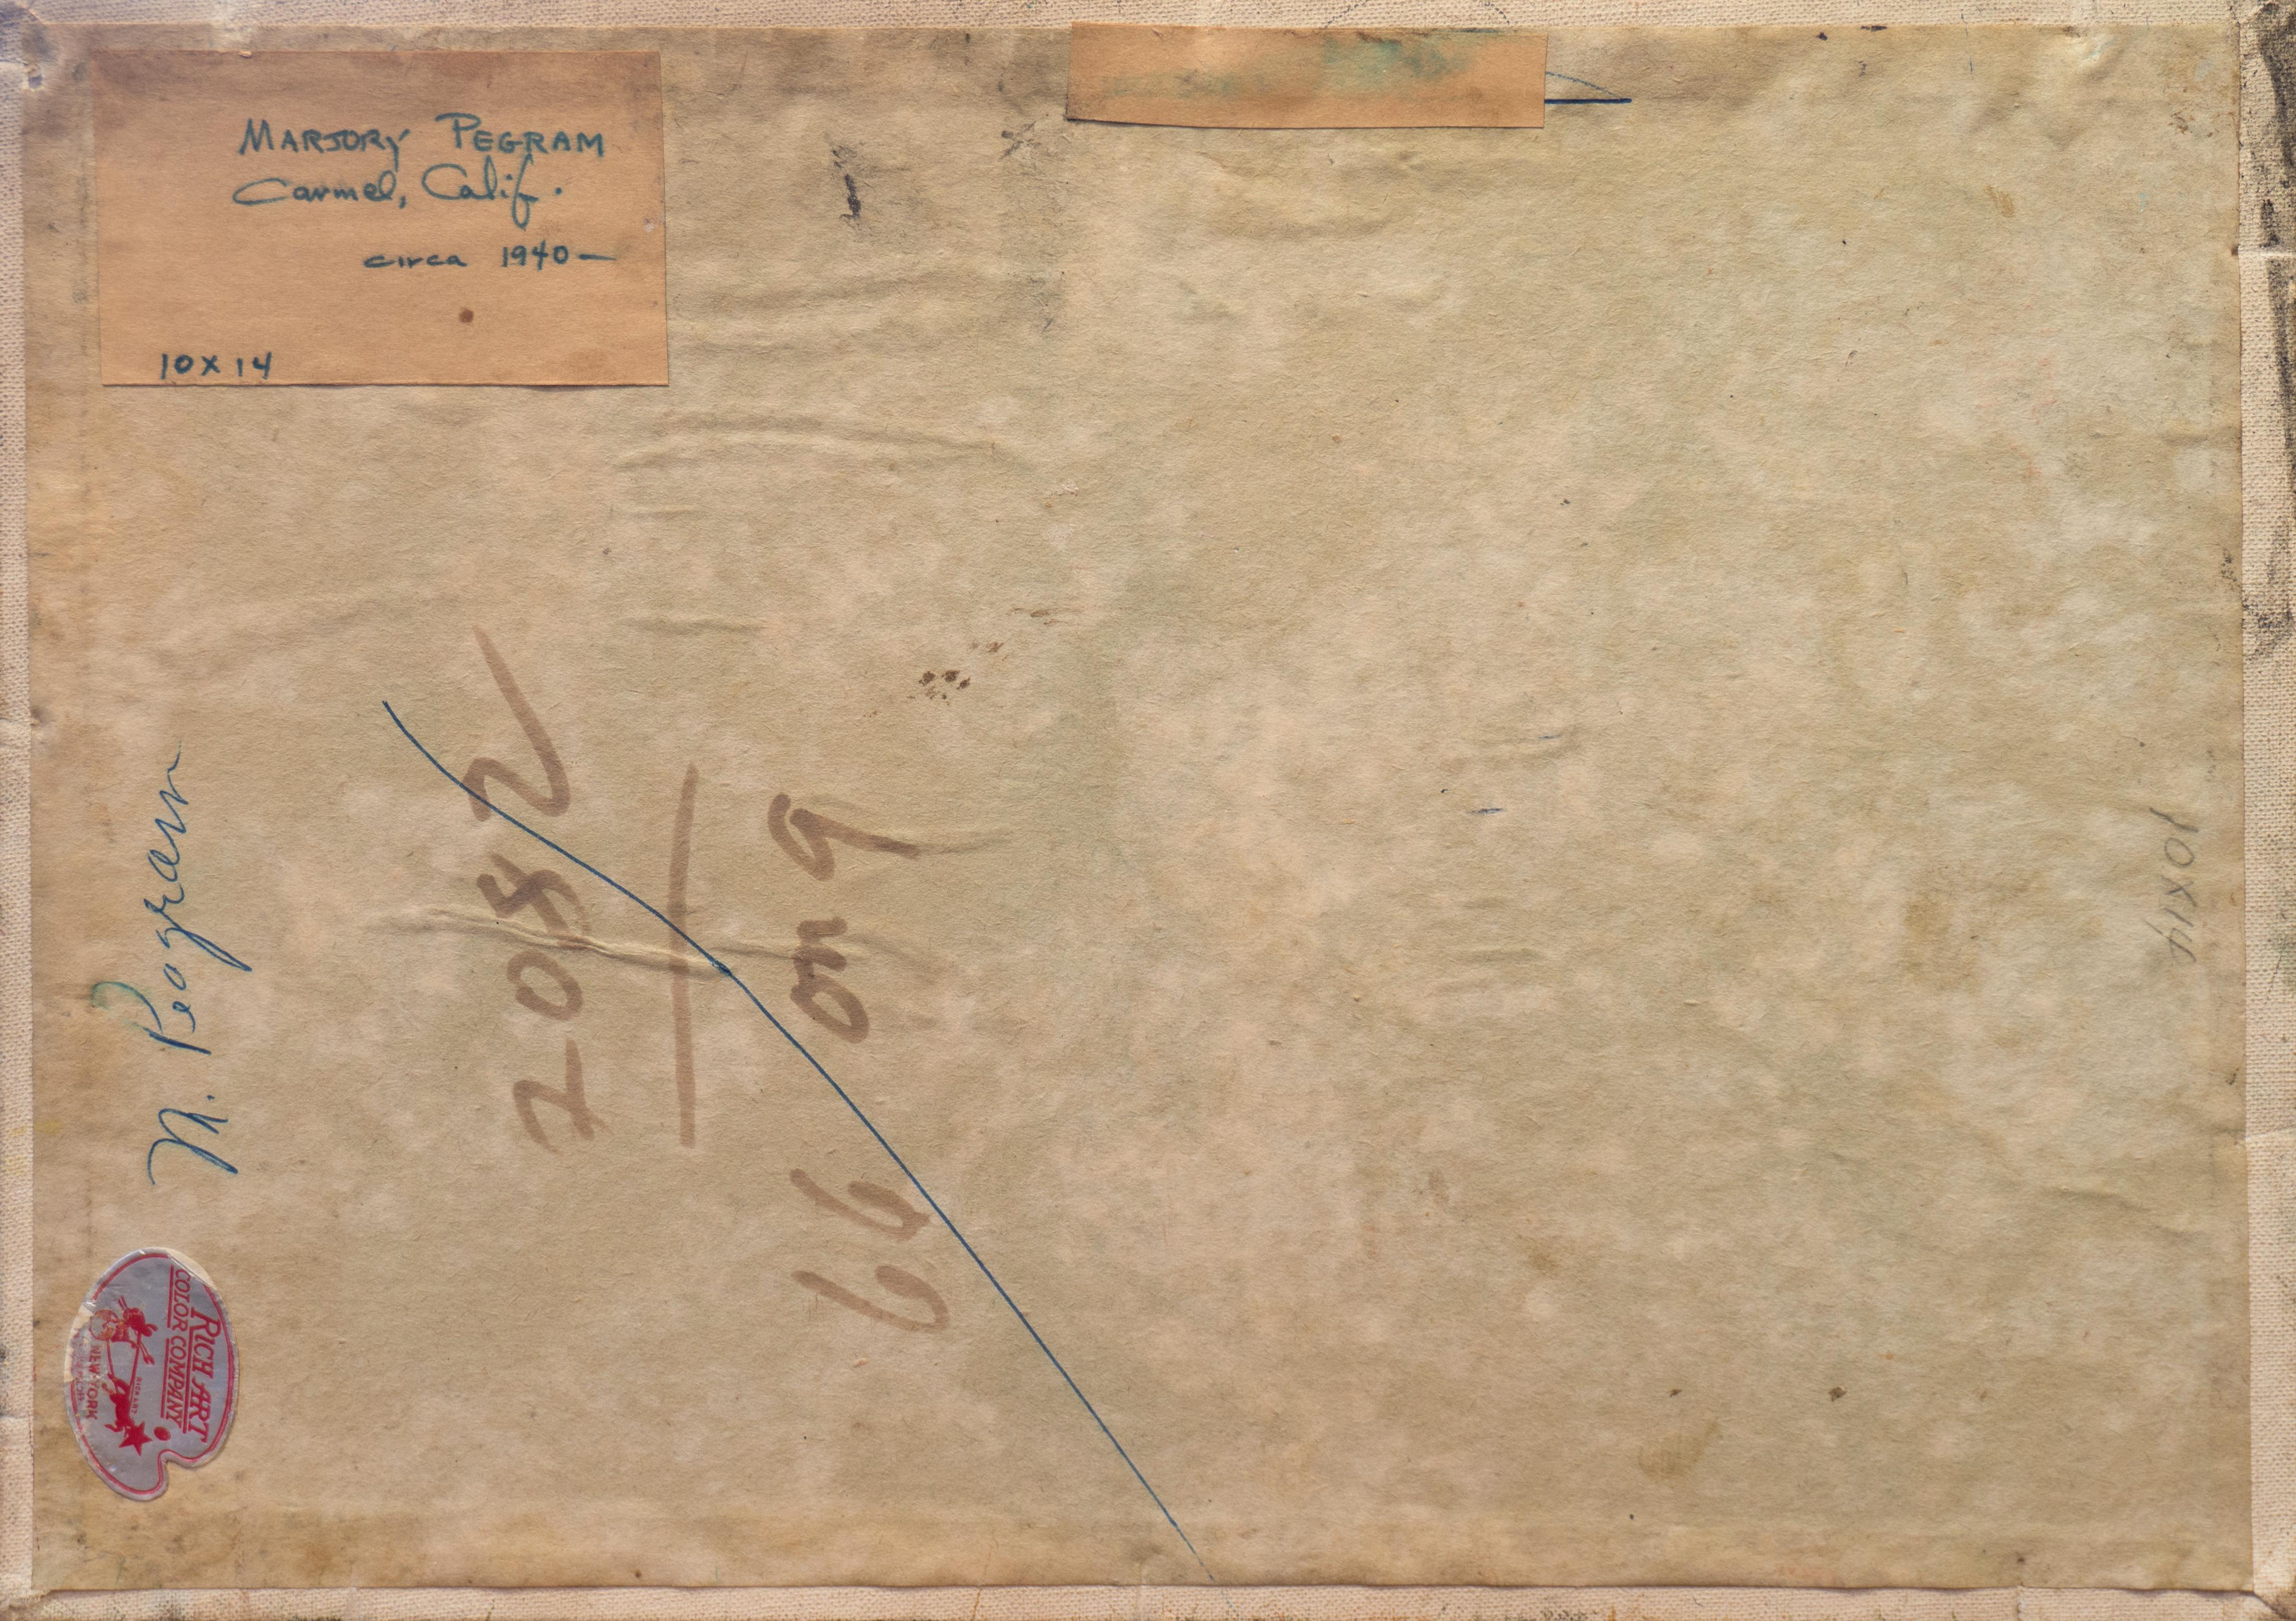 Inscribed, verso, on old label, 'Marjory Pegram, Carmel, Calif. circa 1940' for Marjory Pegram (American, 1883-1972) and painted circa 1940; additionally inscribed 'M. Peagram'.

Born in New York, Marjory Pegram first studied at the Cooper Union